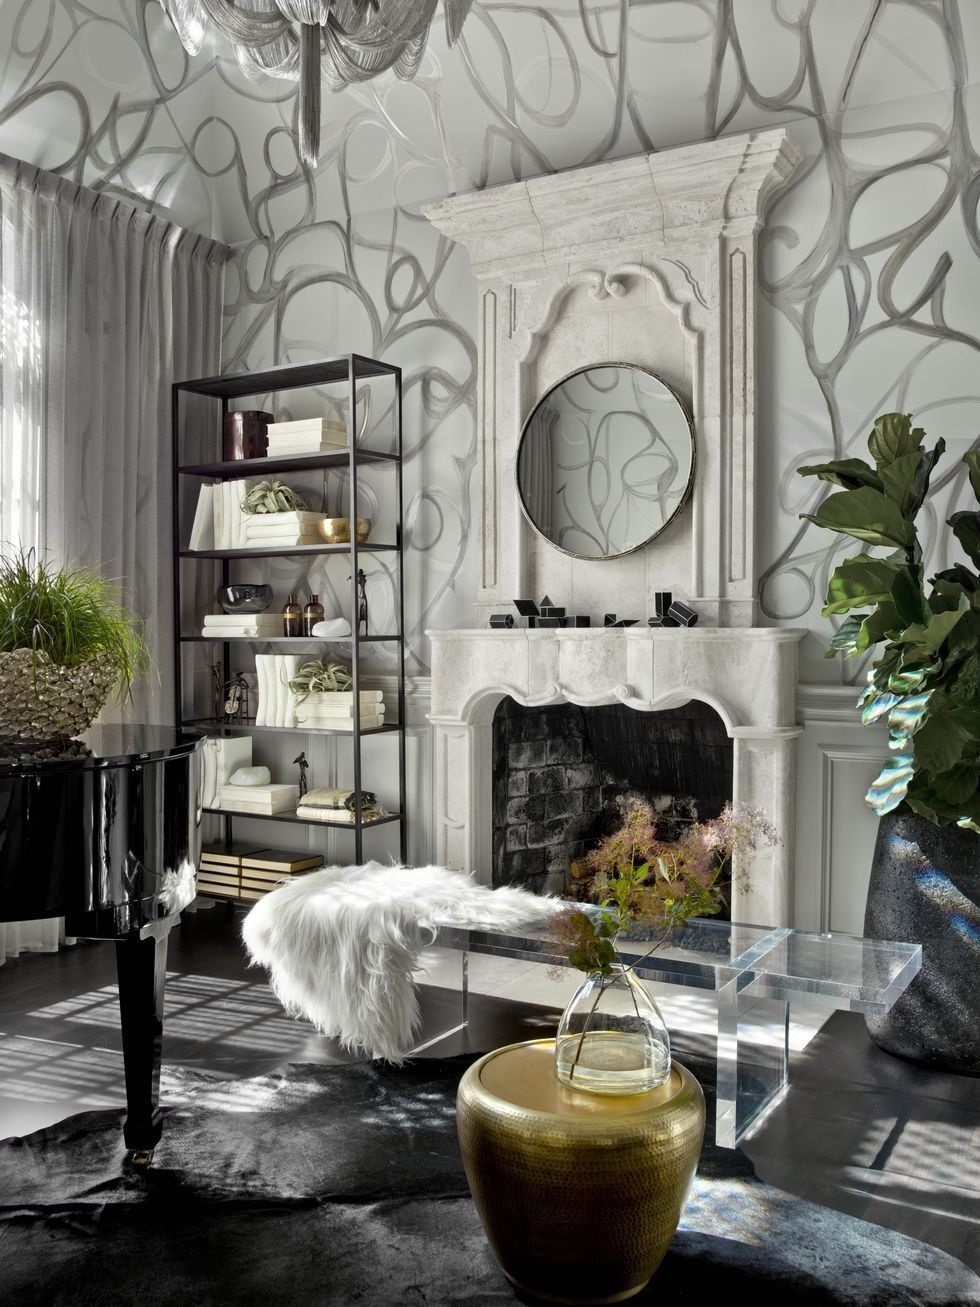 How To Use Black White Decor And Walls